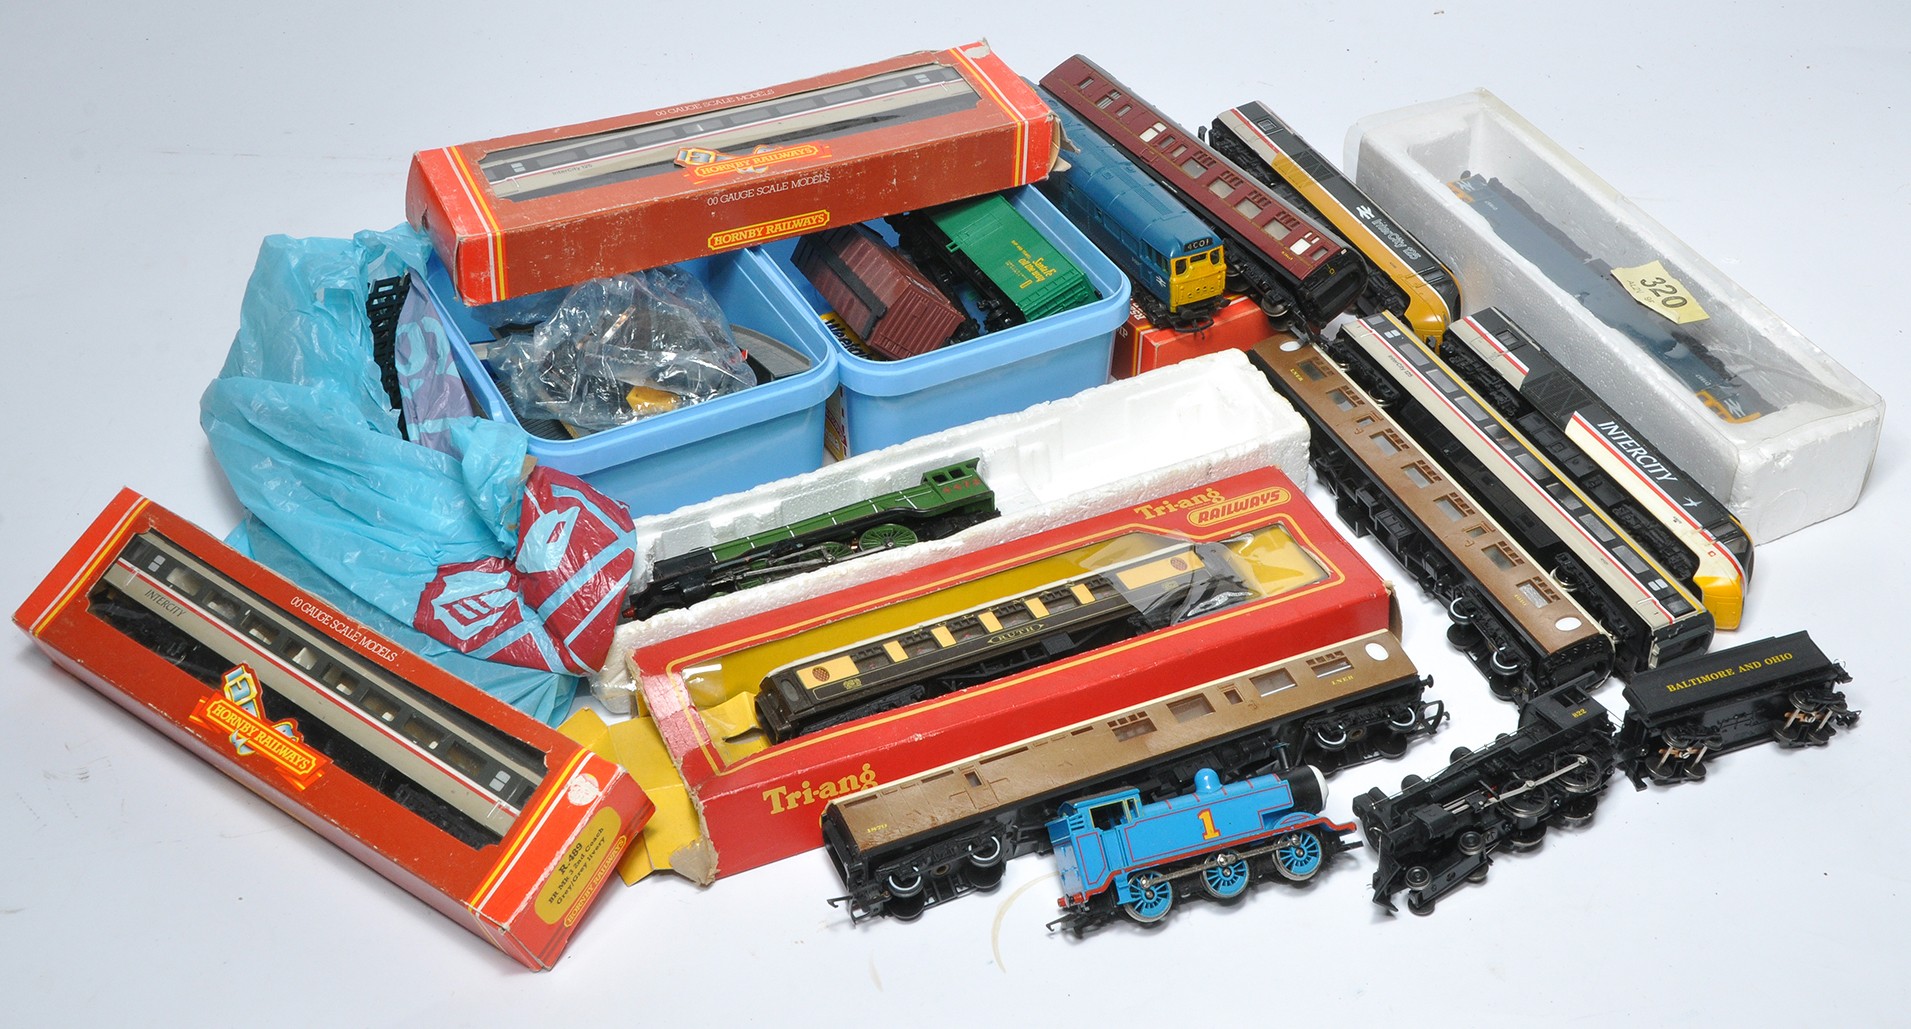 A quantity of model railway items, with signs of use, as shown.